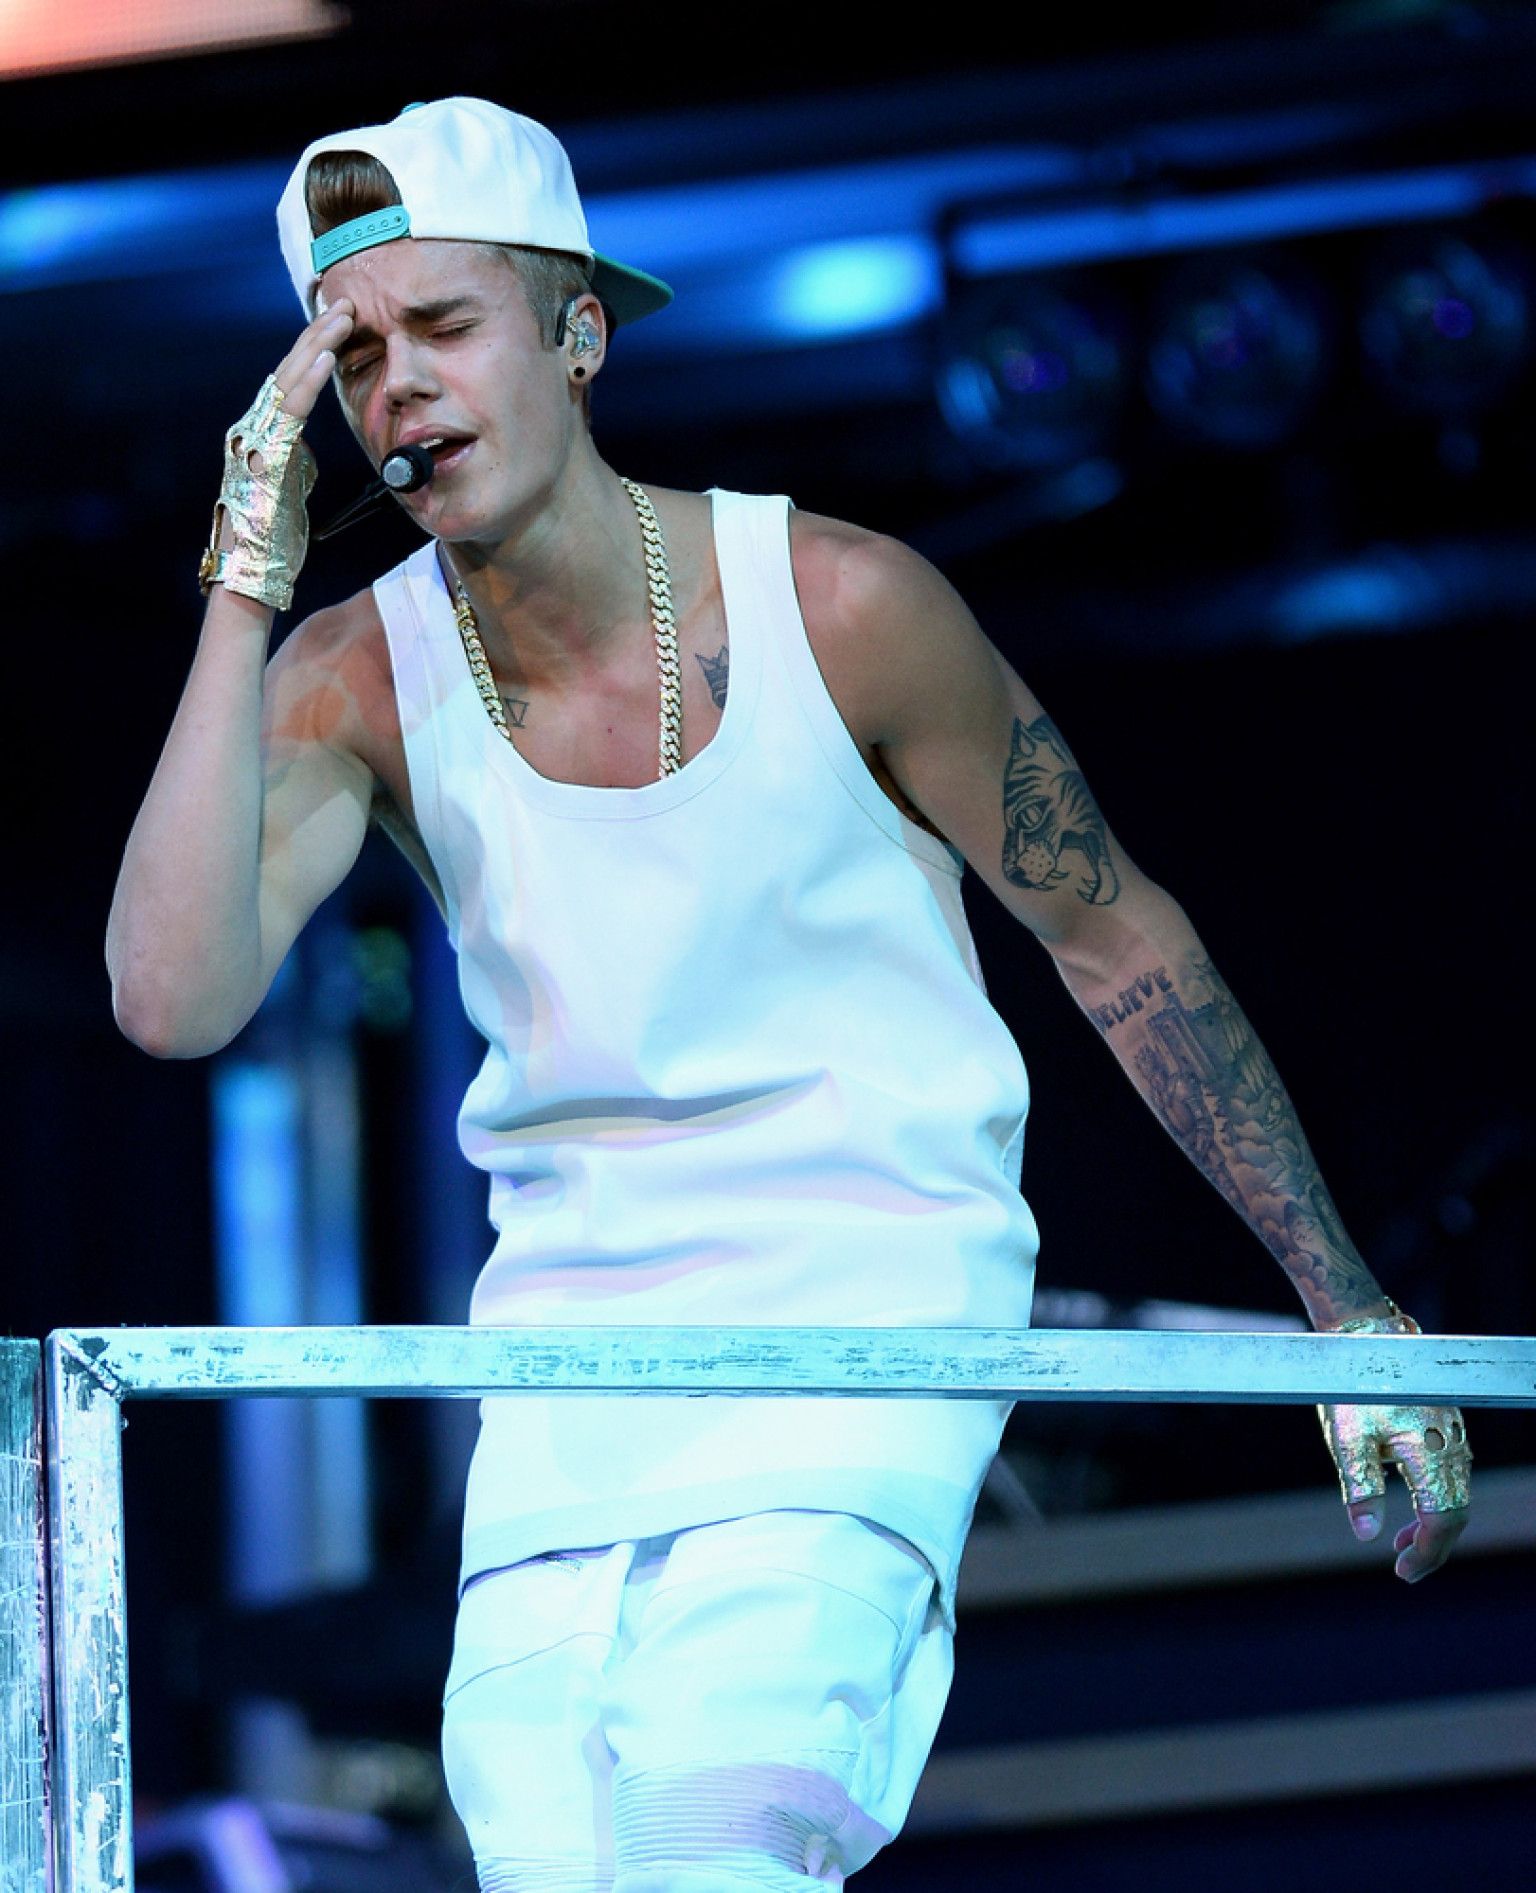 Justin Bieber Accused Of Spitting In DJ's Face At Ohio Nightclub (UPDATE)